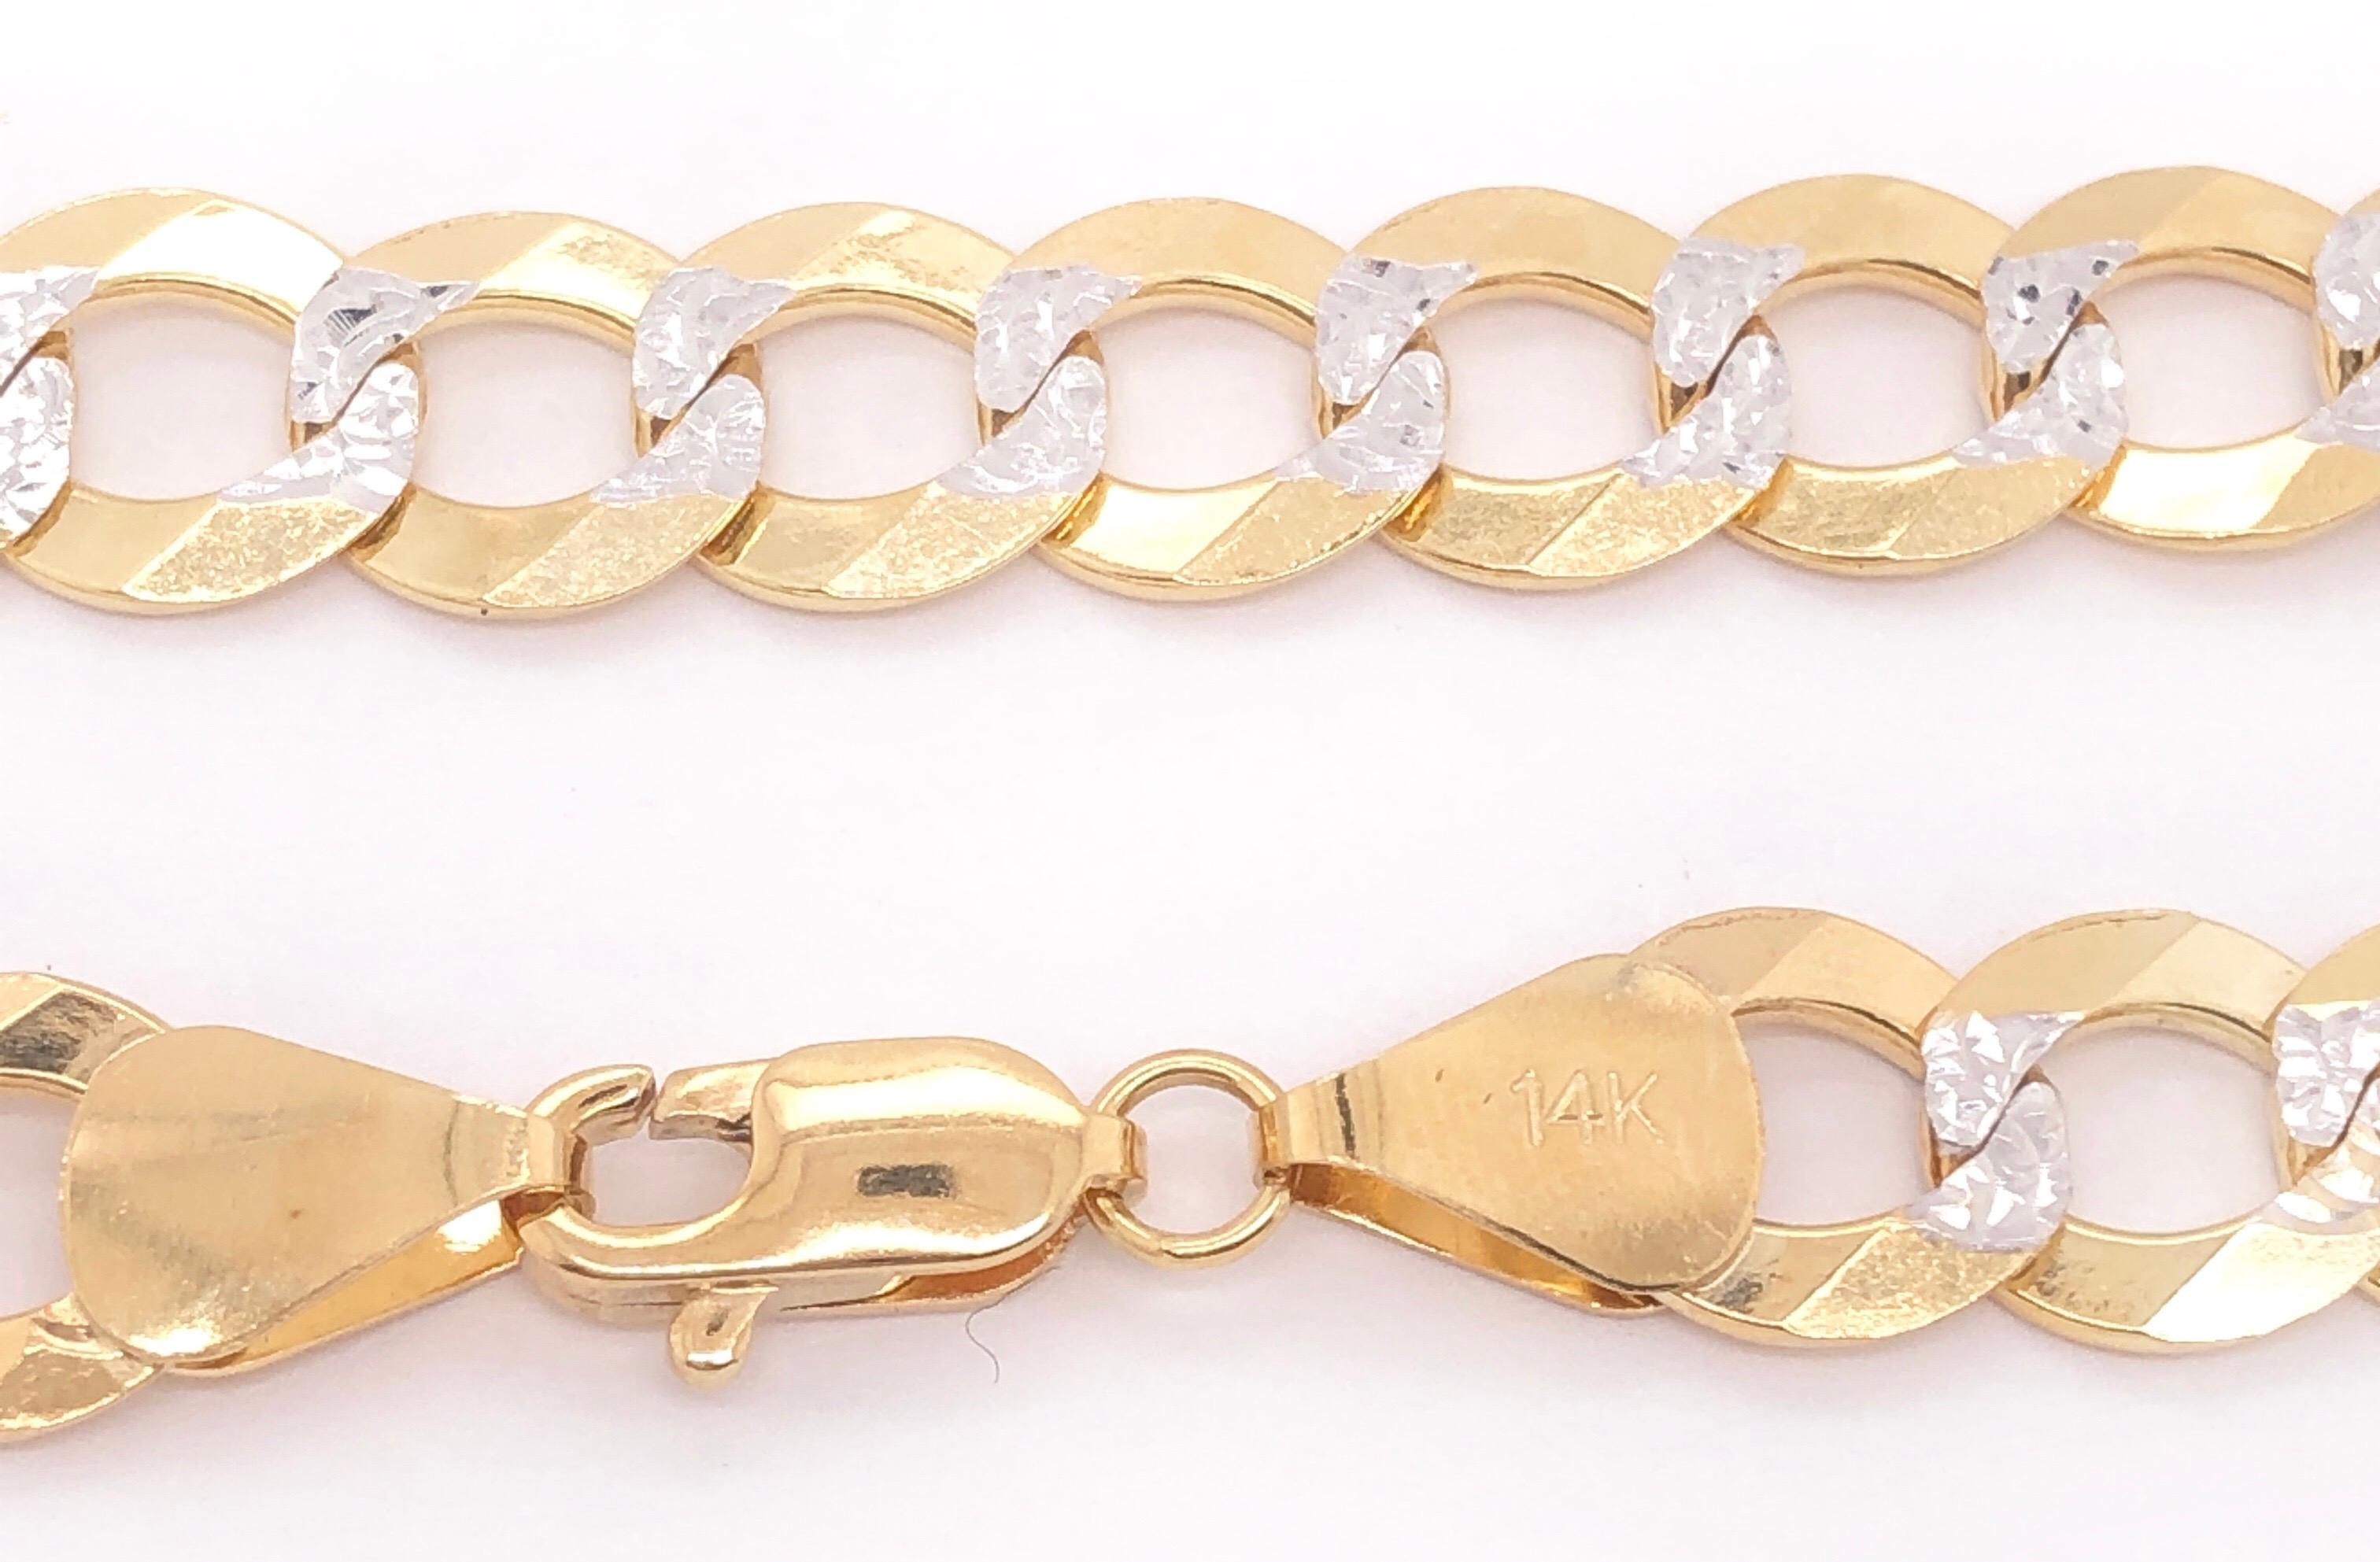 14 Karat Two Tone White And Yellow Gold 8 Inch Fancy Link Bracelet.
14 grams total weight.